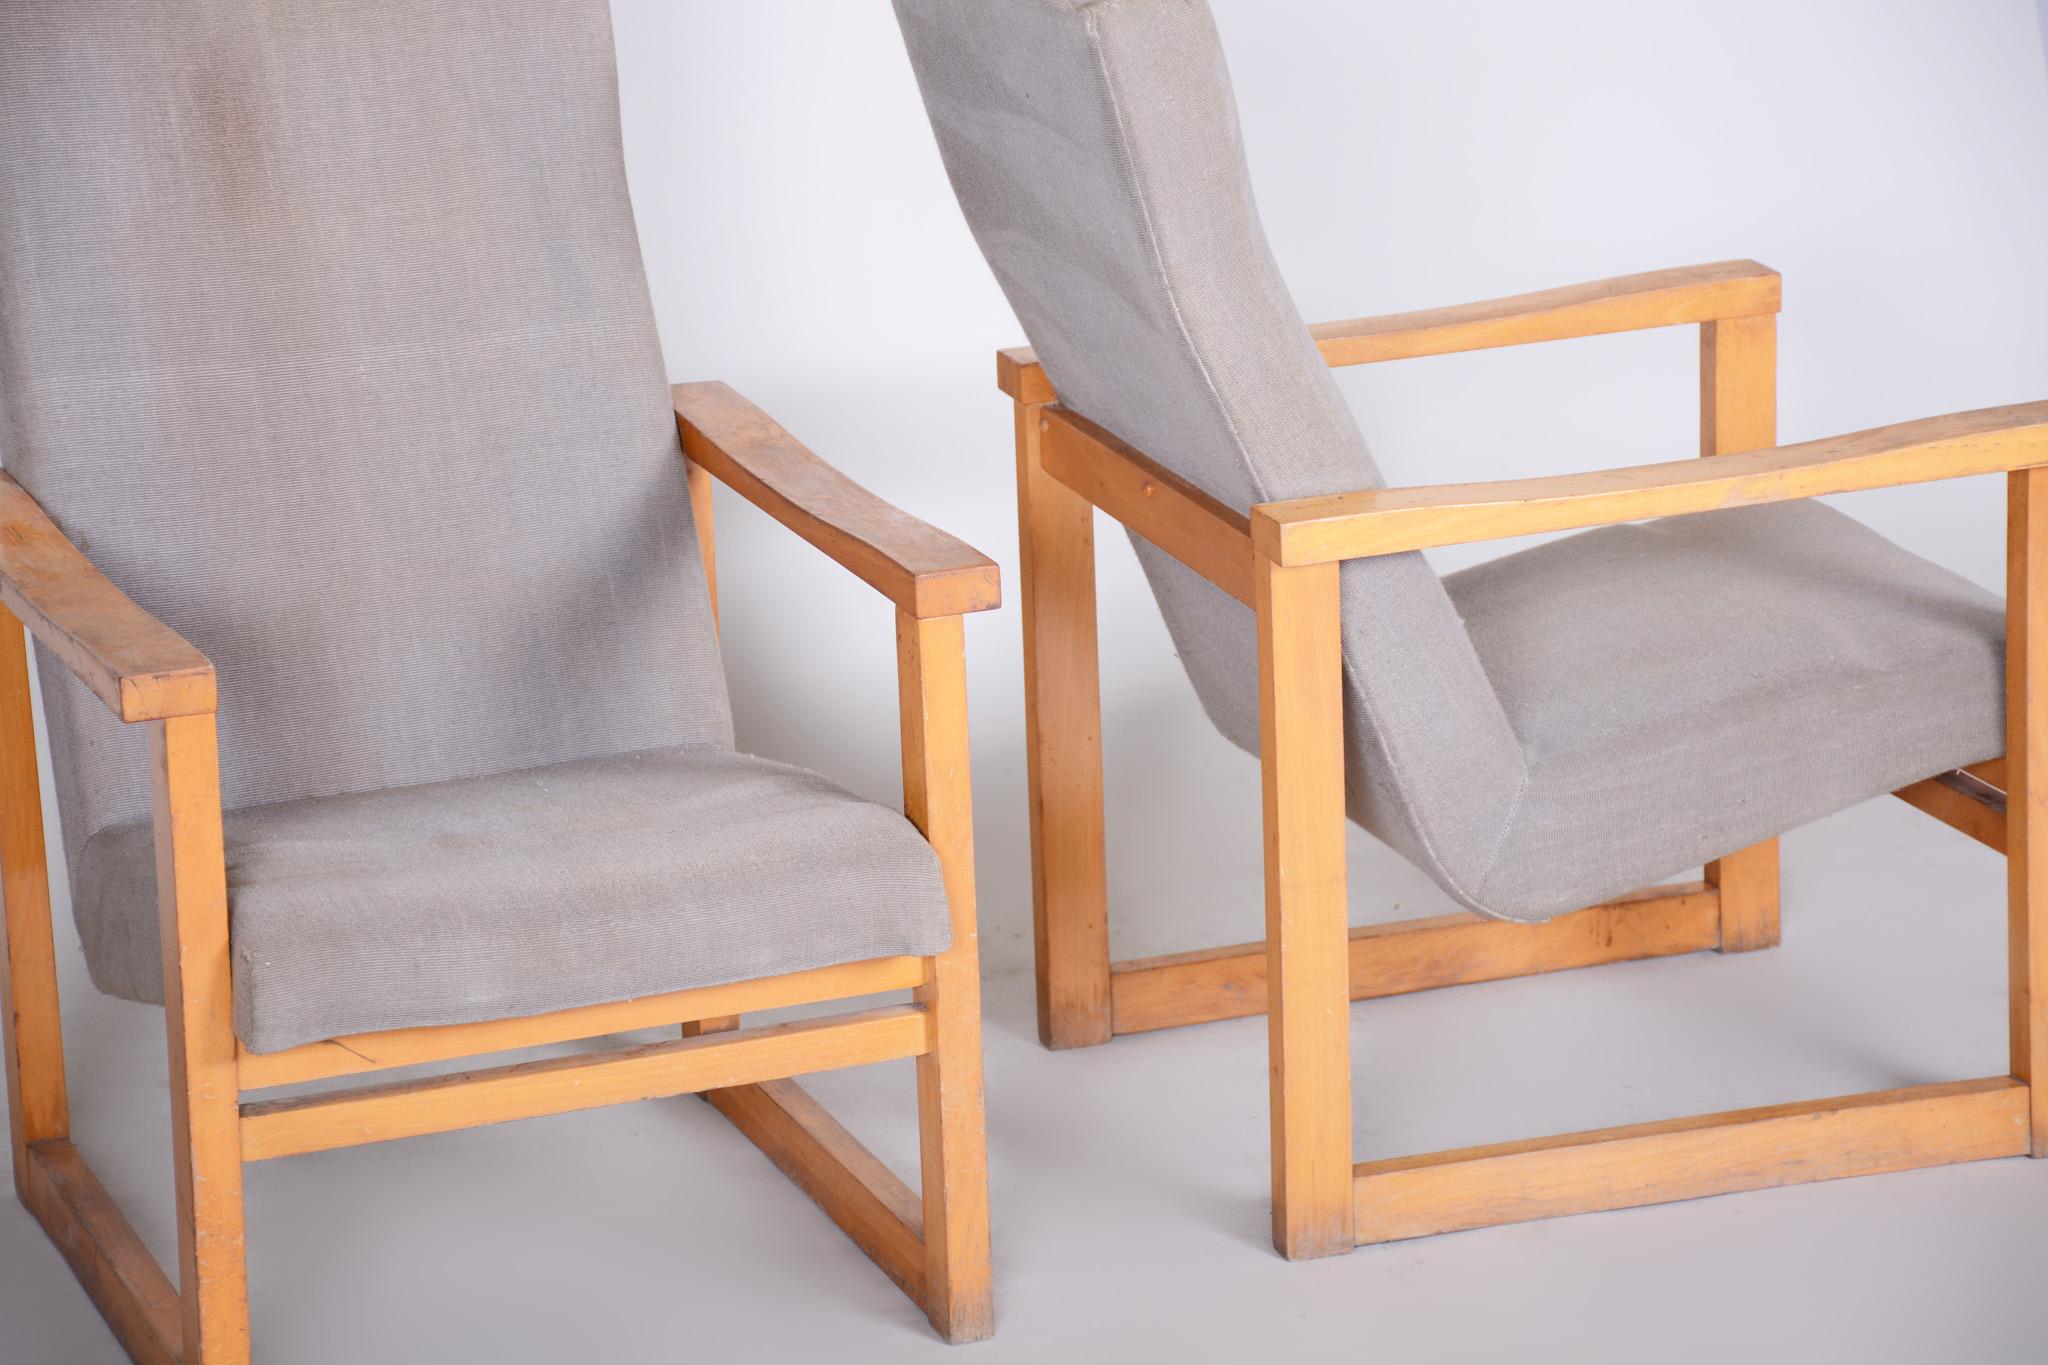 Fabric 20th Century, Beige Pair of Maple Armchairs, Original Condition, Czechia, 1960s For Sale